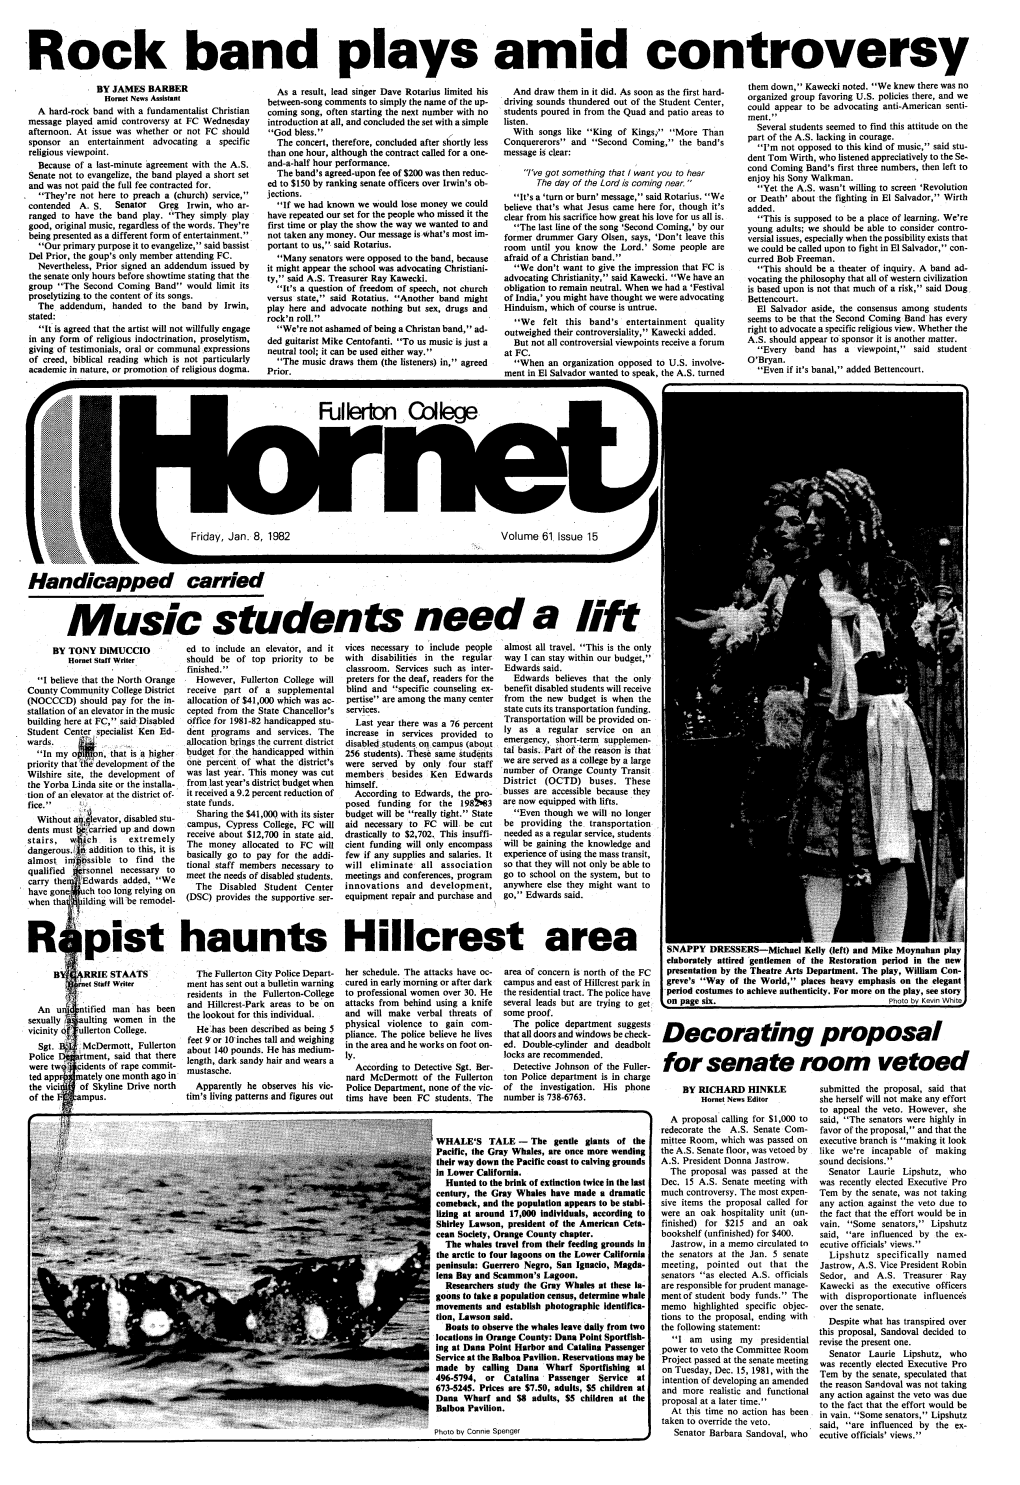 The Hornet, 1923 - 2006 - Link Page Previous Volume 61, Issue 14 Next Volume 61, Issue 16